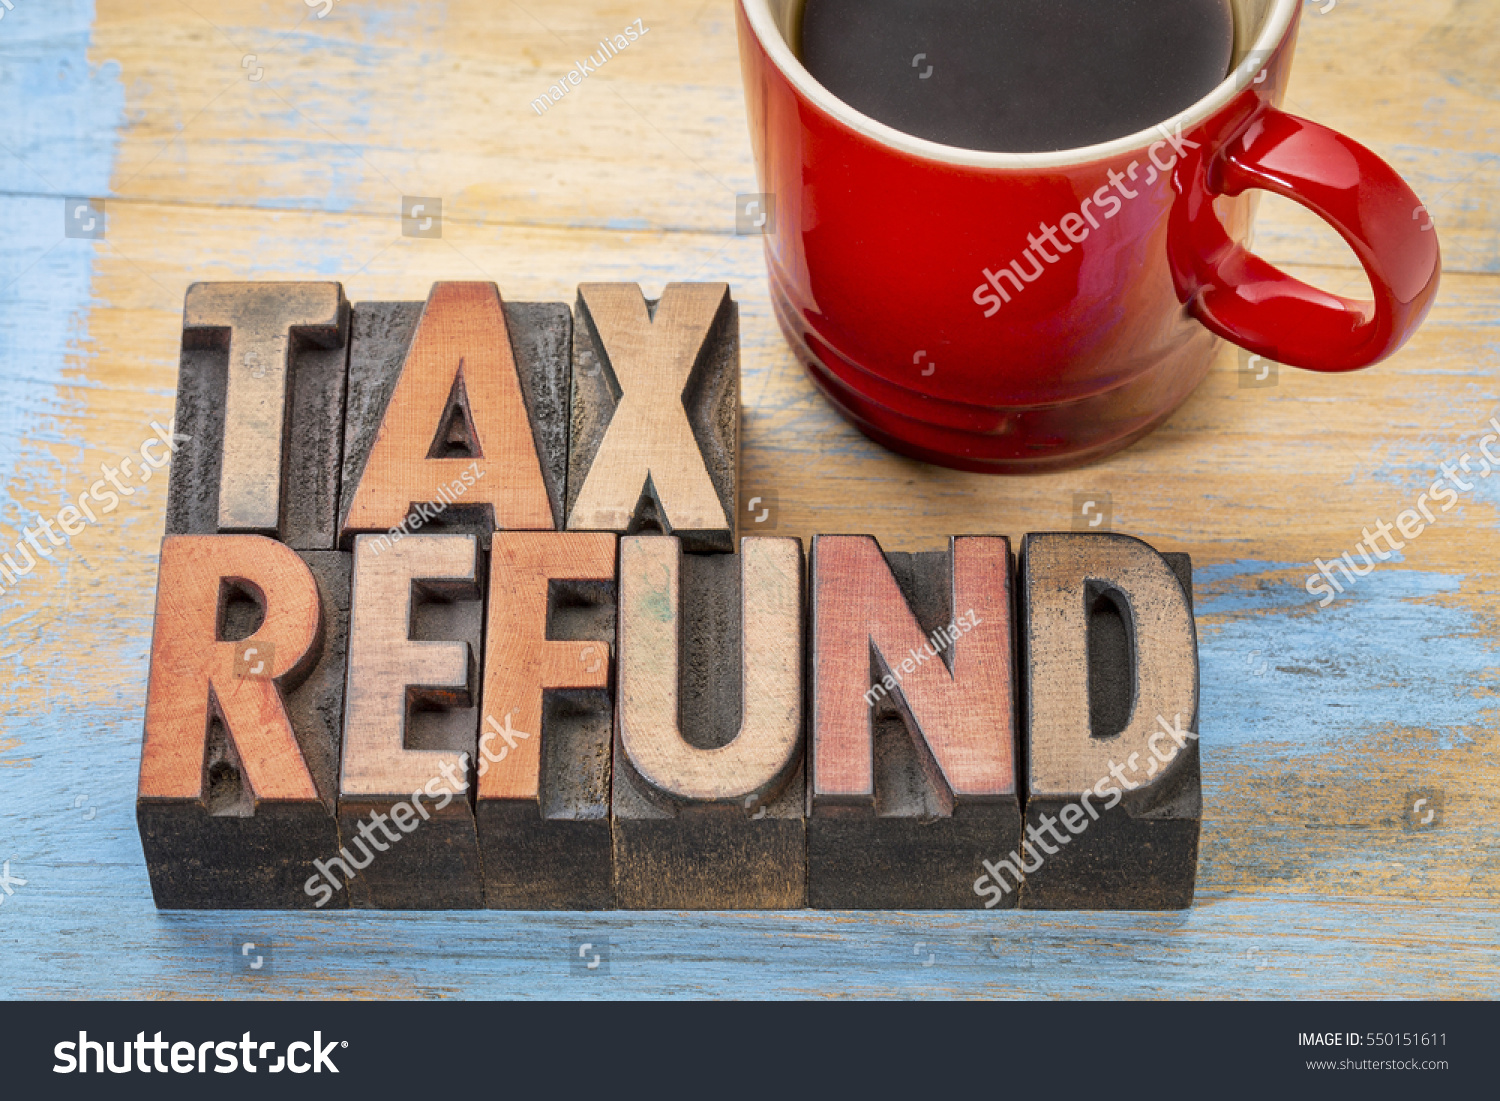 The word tax refund is written in wooden letterpress type next to a cup of coffee.